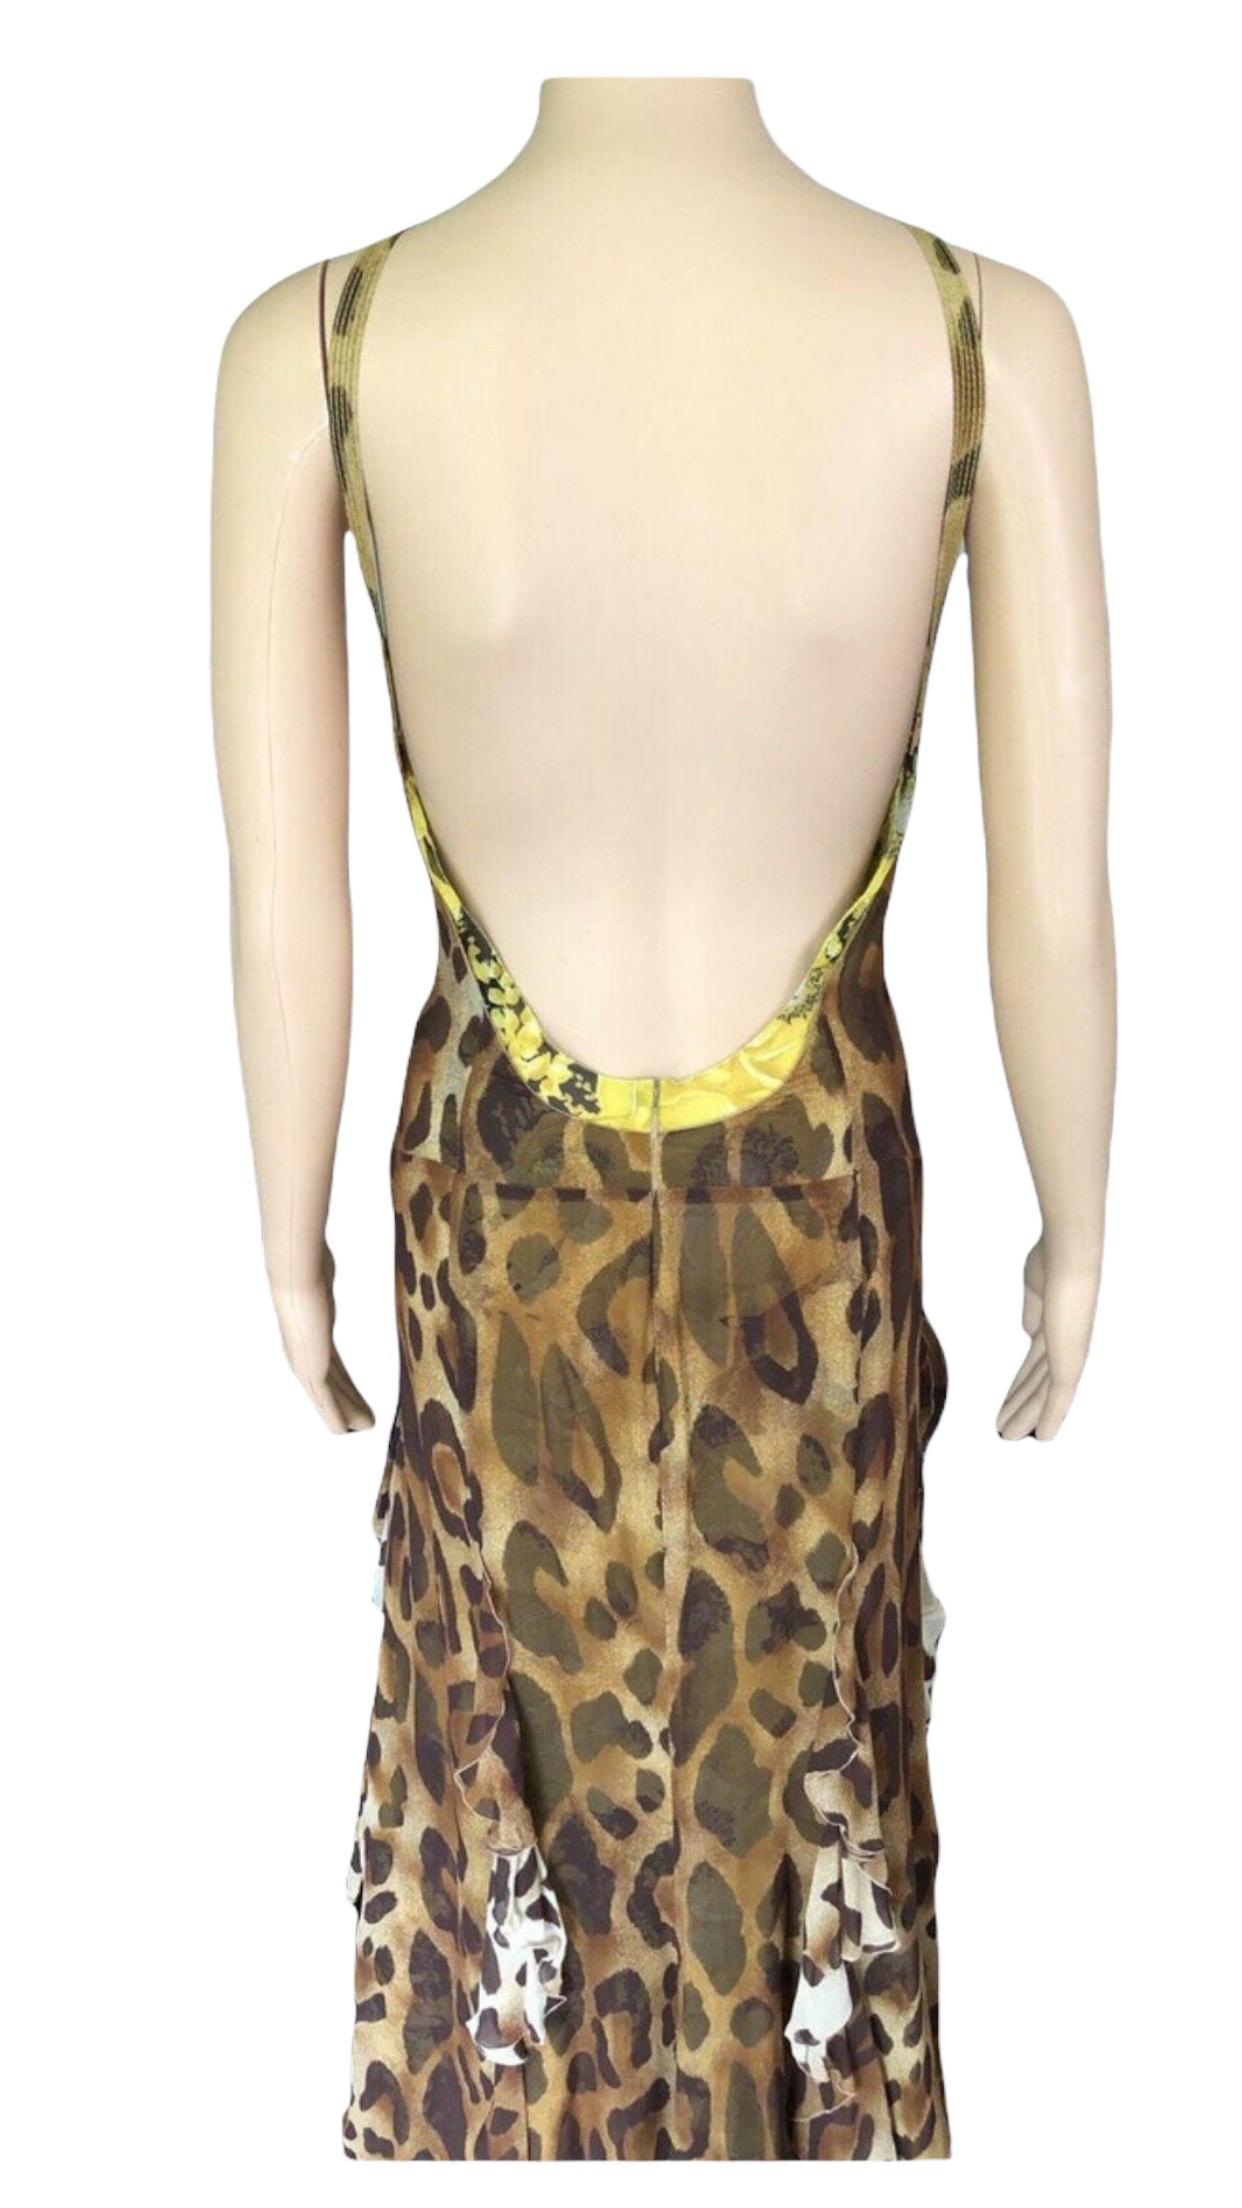 Gianni Versace S/S 2002 Vintage Plunged Backless Dress Gown For Sale 5